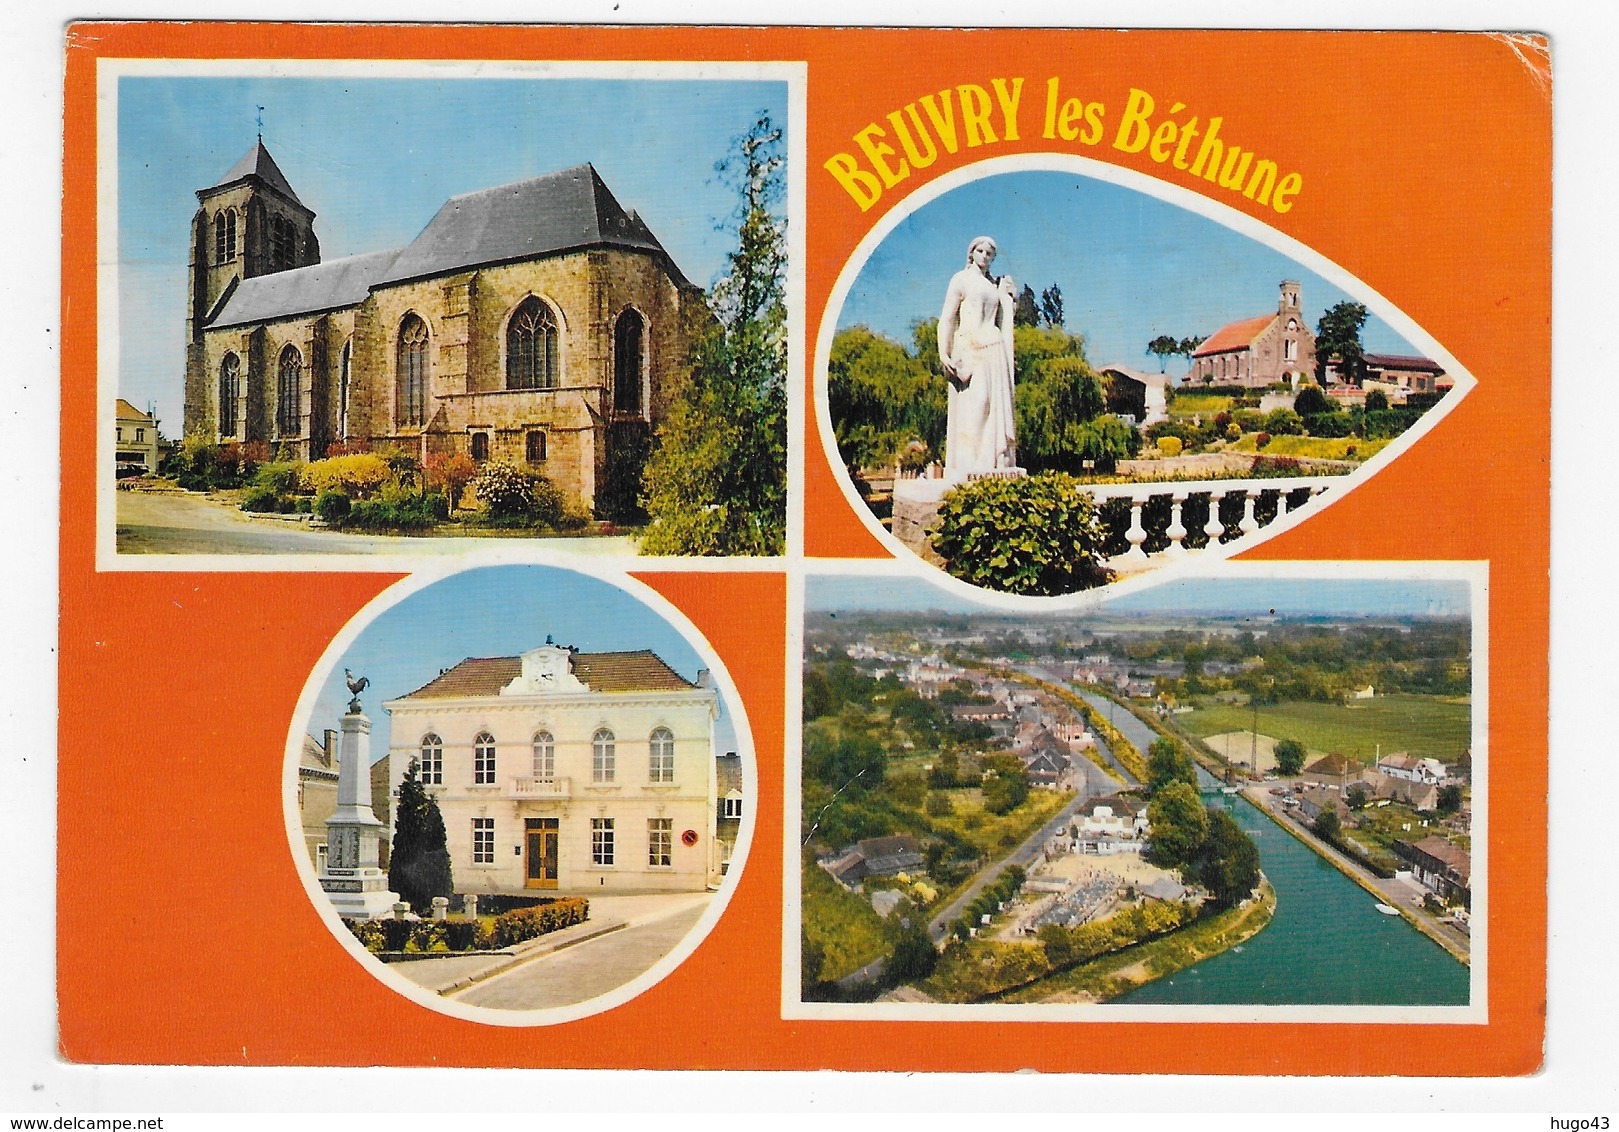 BEUVRY EN 1976 - MULTIVUES - CPSM GF VOYAGEE - Beuvry